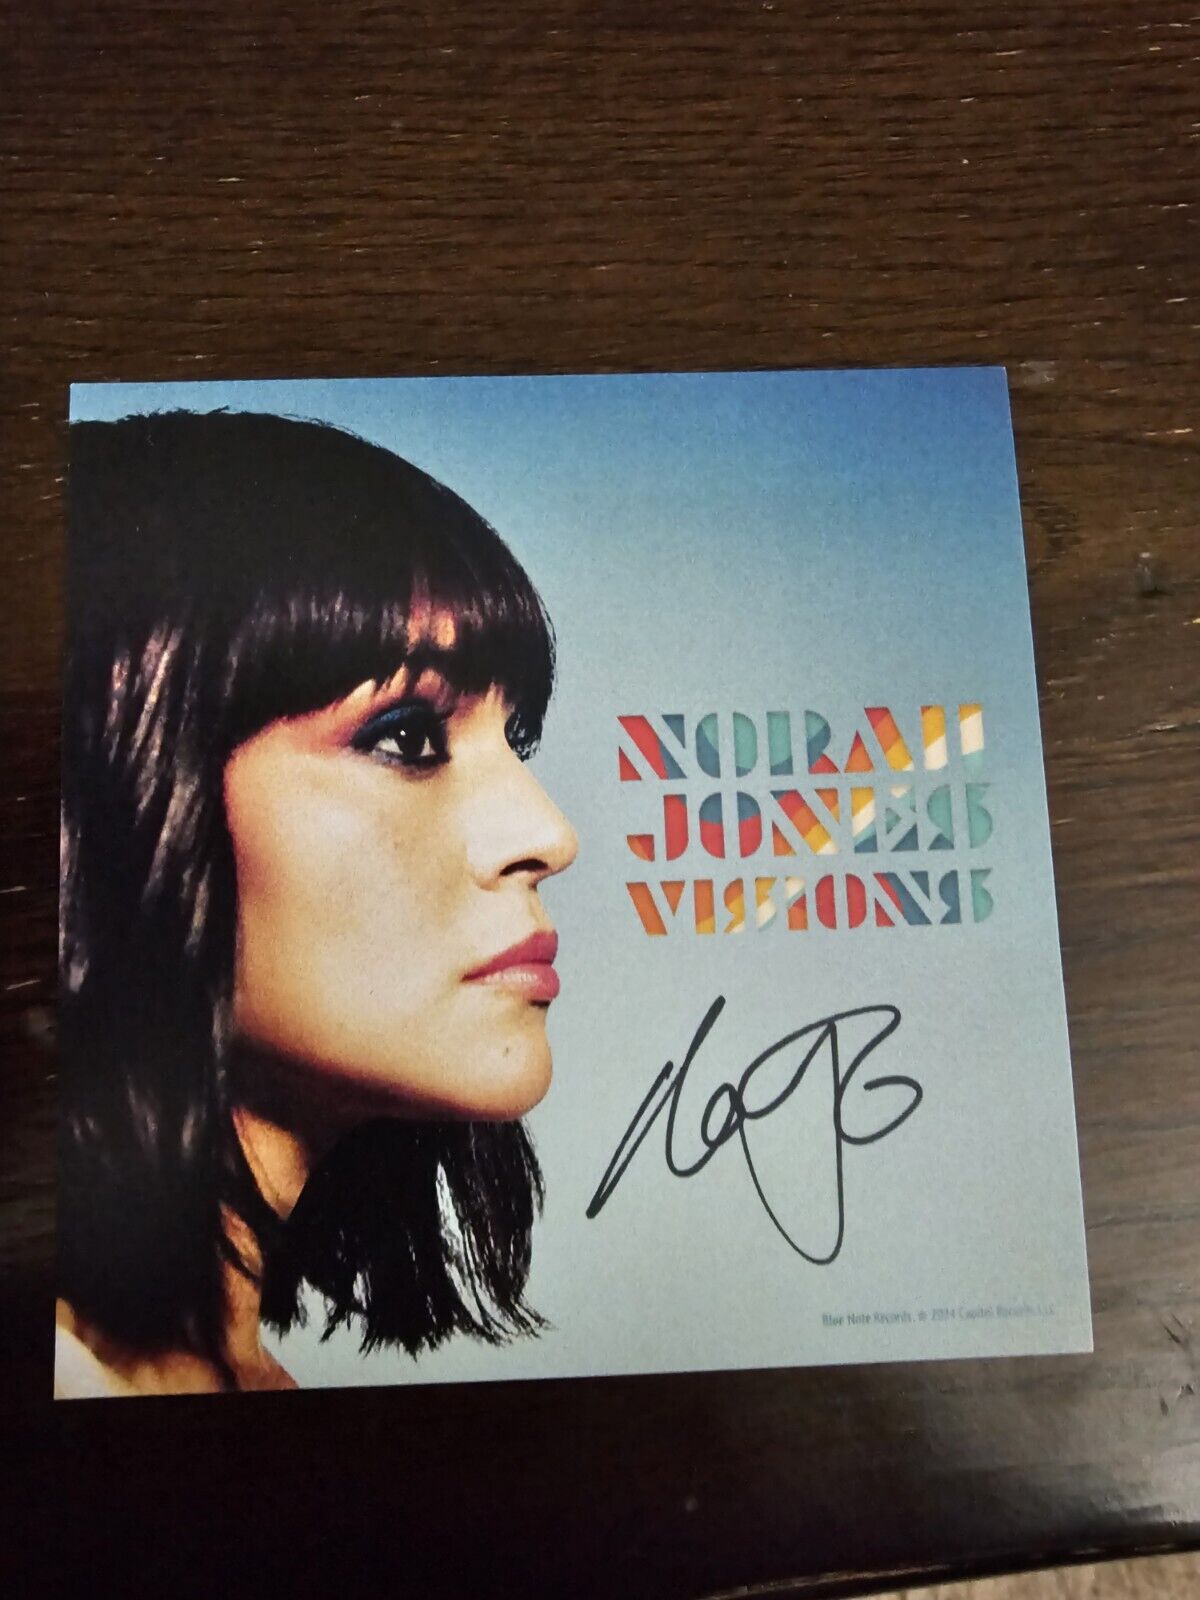 Norah Jones Visions CD with Autographed Insert